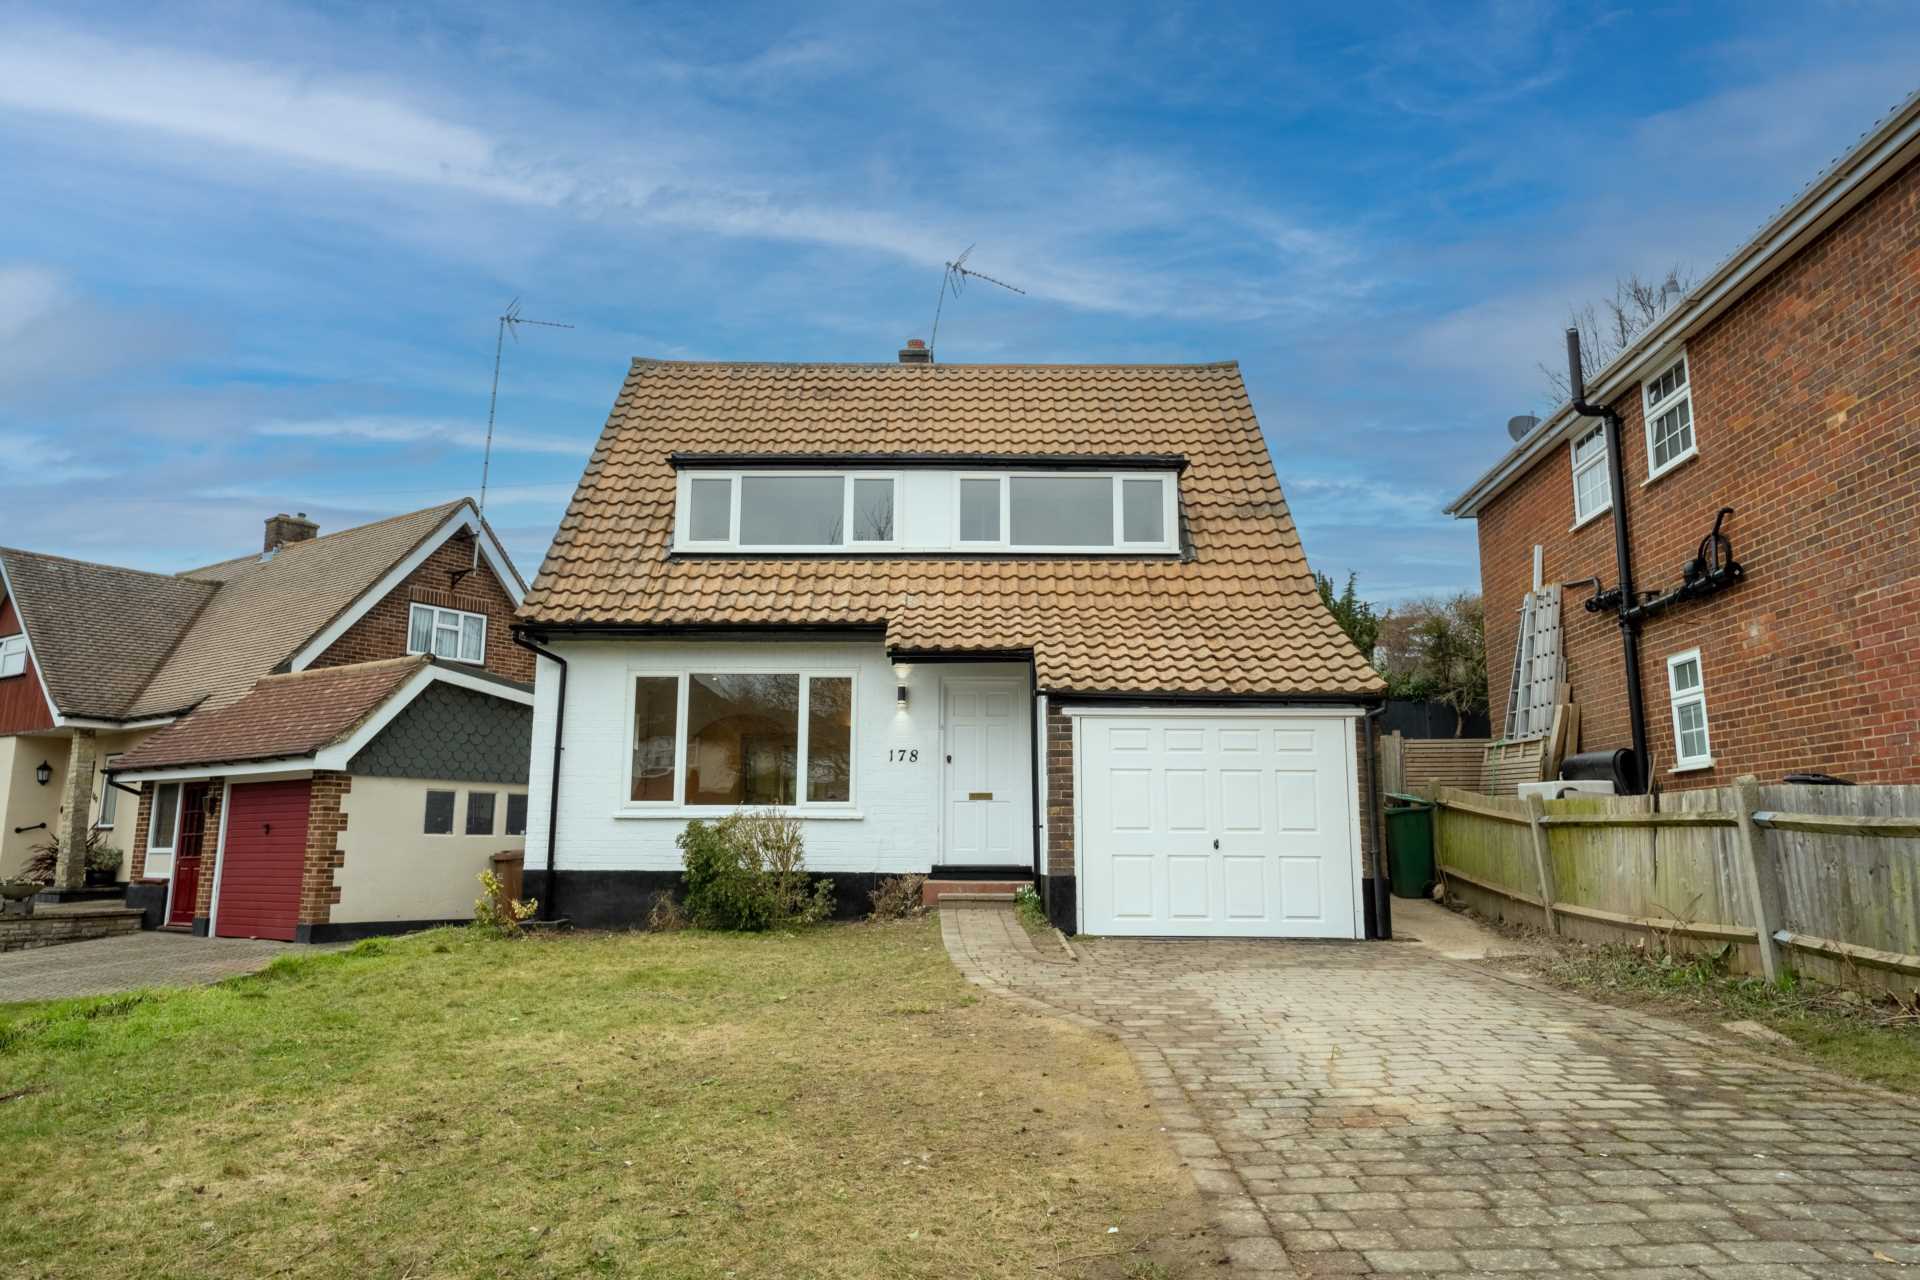 4 bed Detached House for rent in Banstead. From Drury & Cole